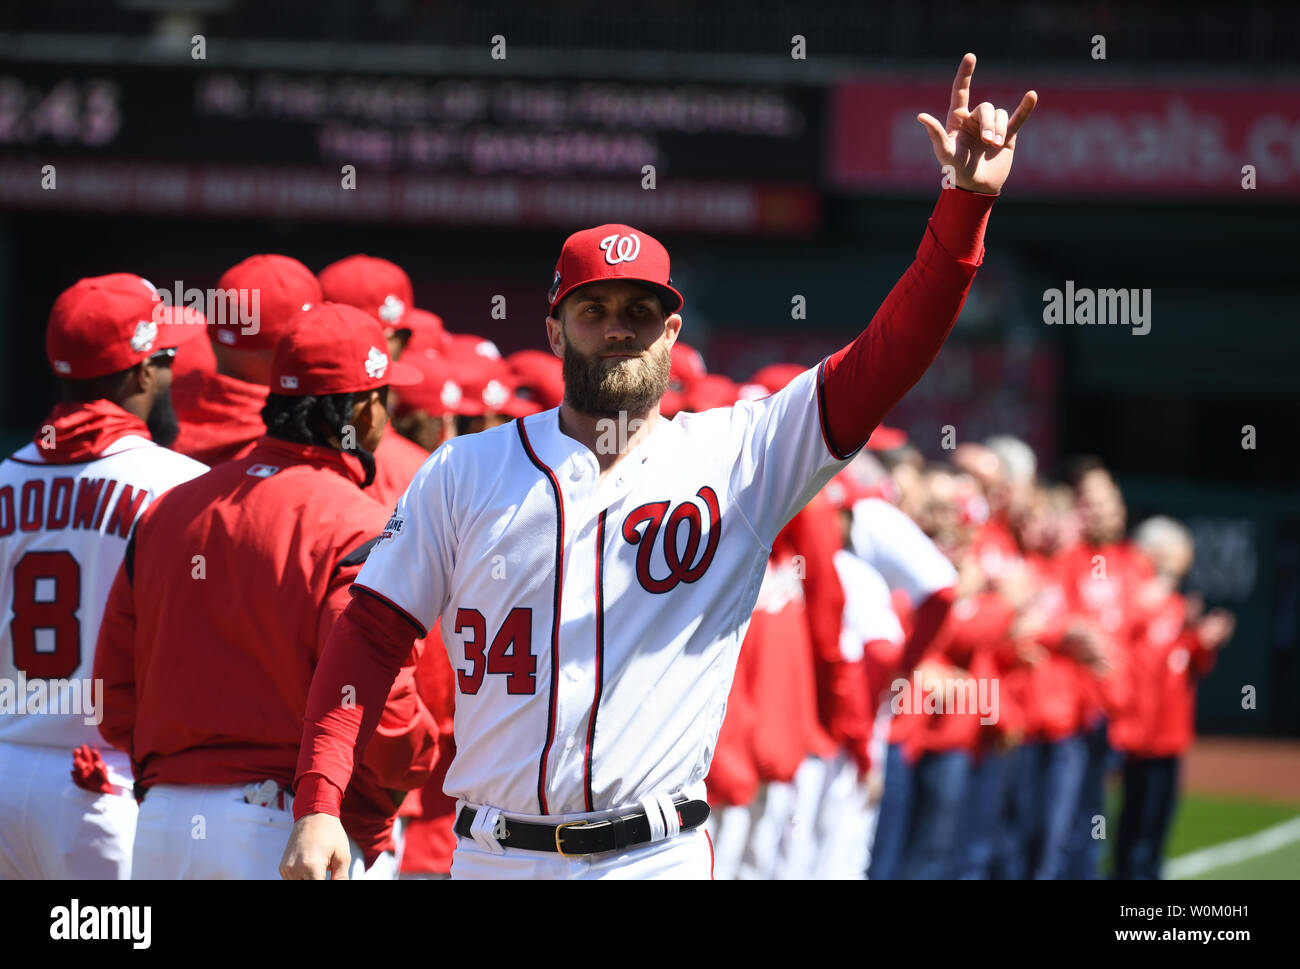 Washington Nationals Bryce Harper waves to the crowd as he is introduced  prior to Nats home opener against the New York Mets at Nationals Park in  Washington, DC on April 5, 2018.